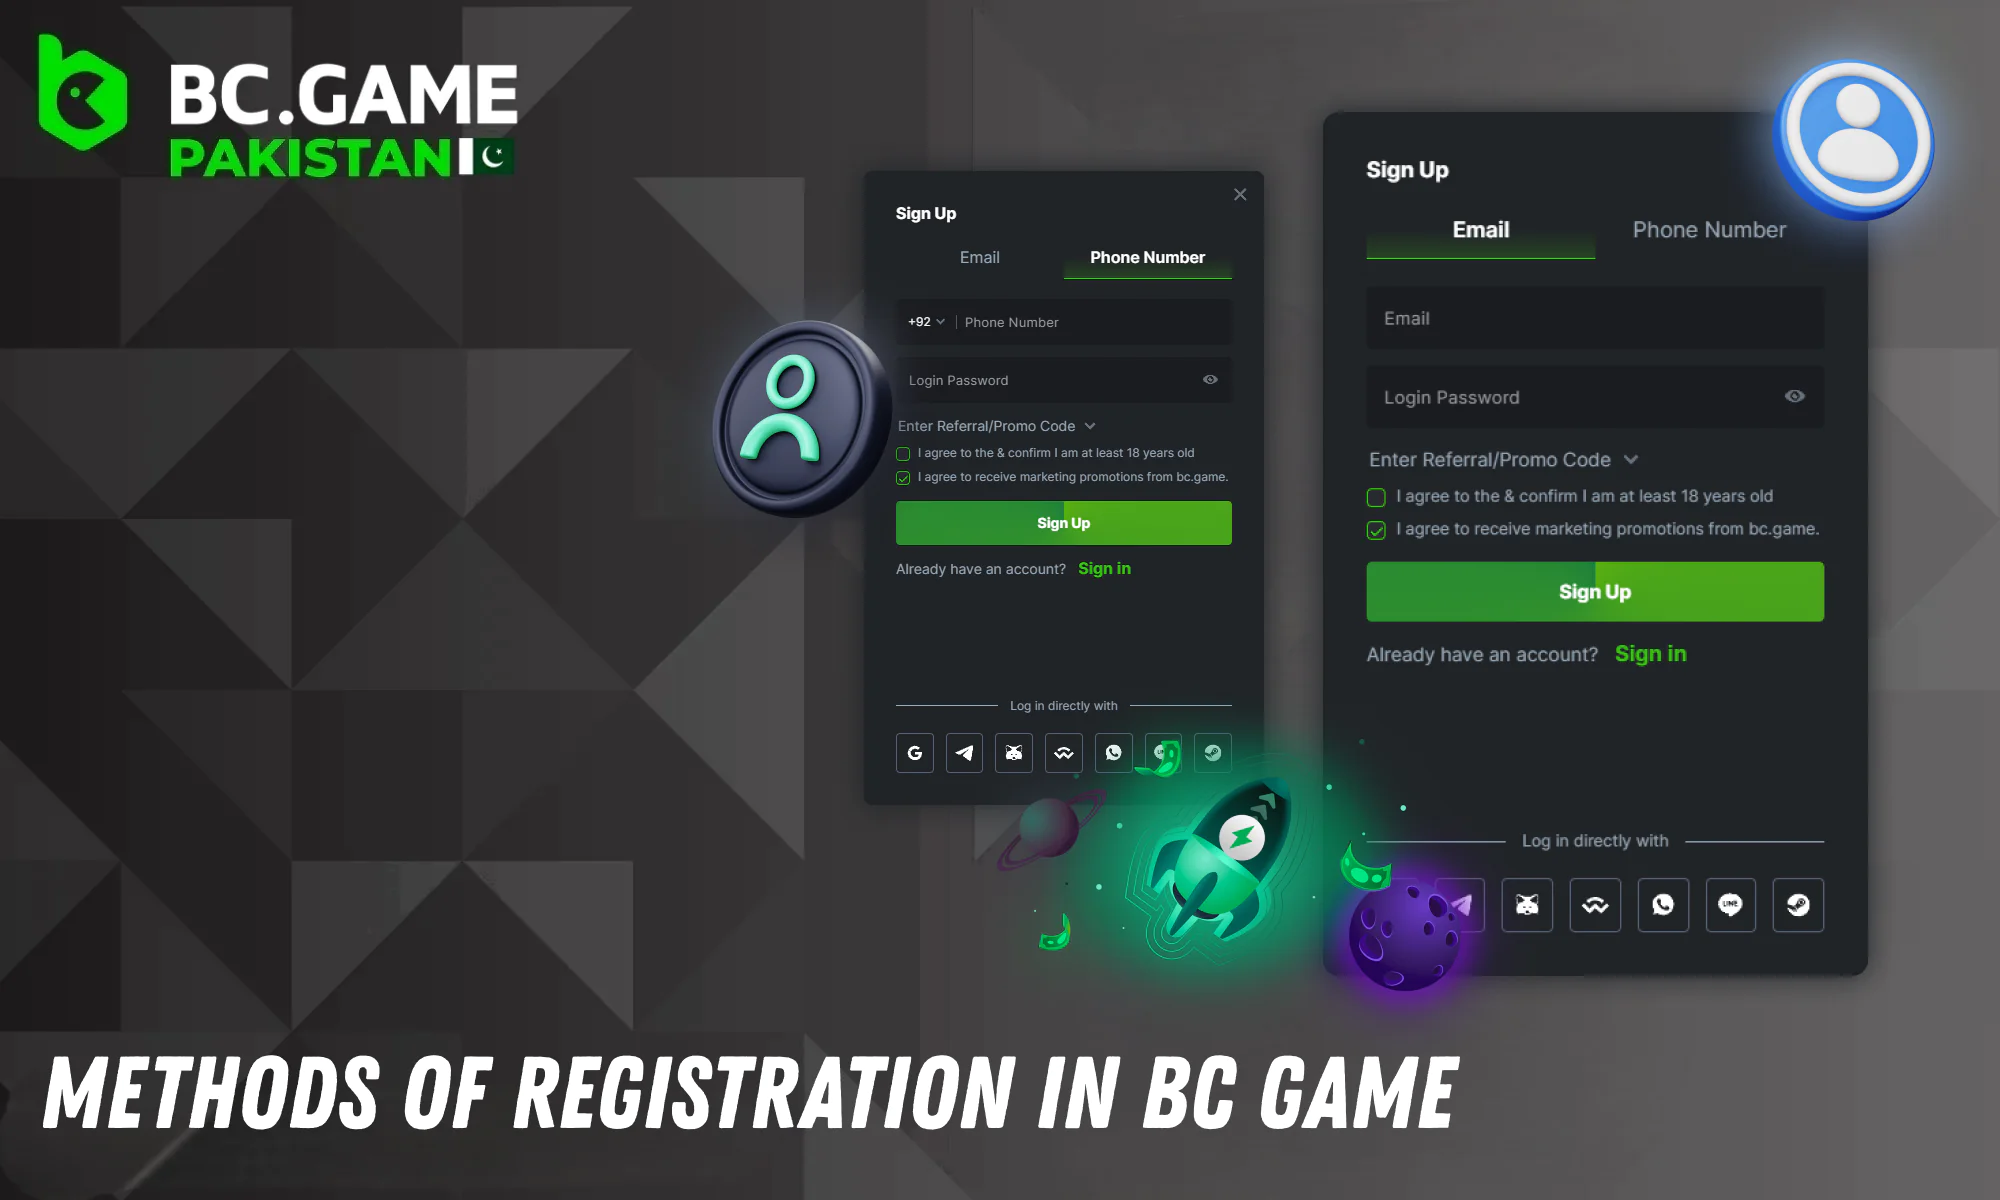 BC Game offers multiple registration methods to sign up quickly and conveniently